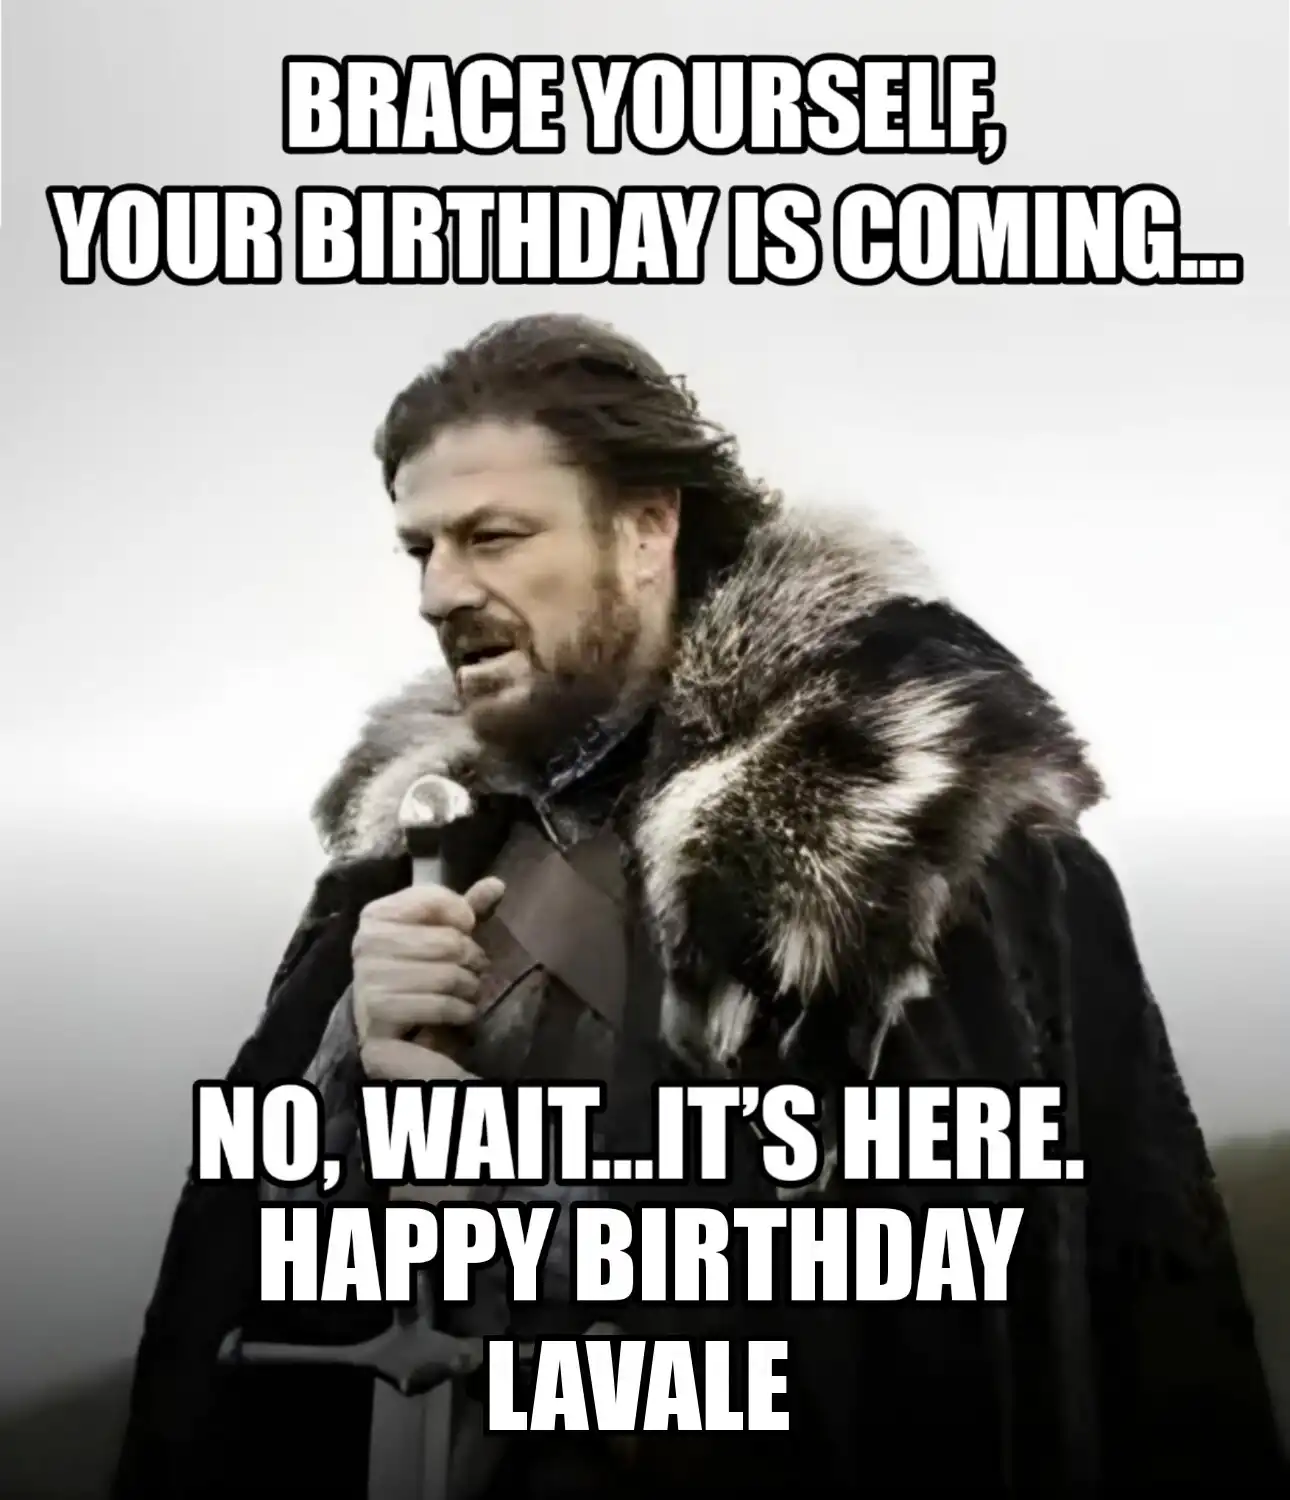 Happy Birthday Lavale Brace Yourself Your Birthday Is Coming Meme